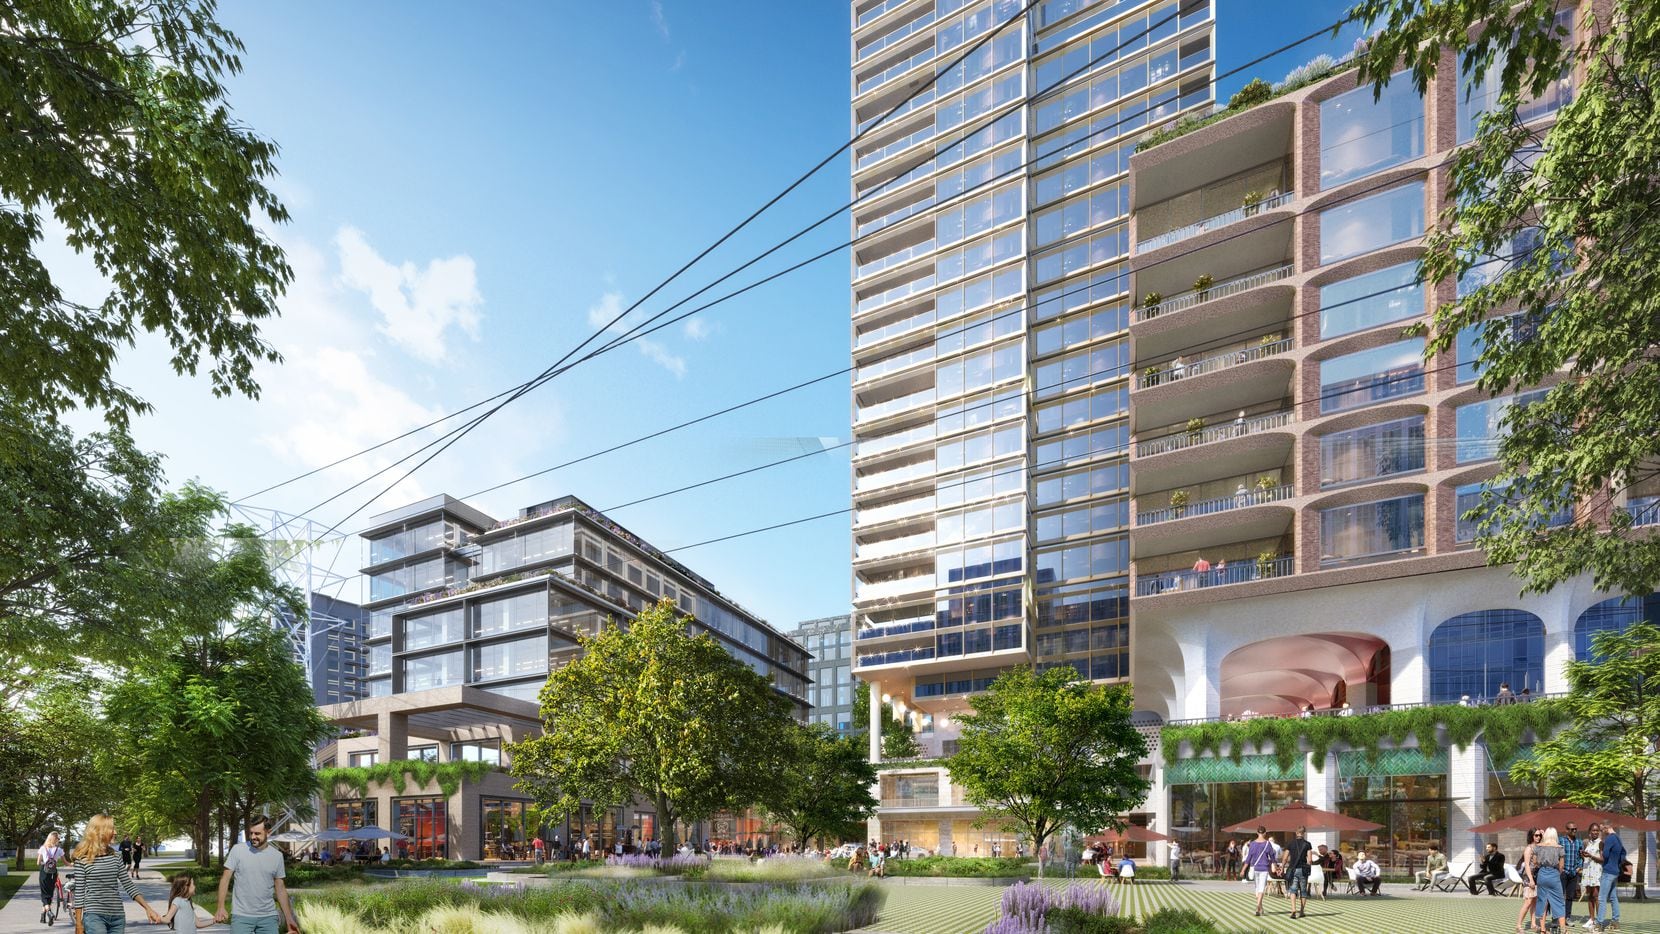 The high-rise mixed-use development on Dallas' Knox Street will include retail, office and...